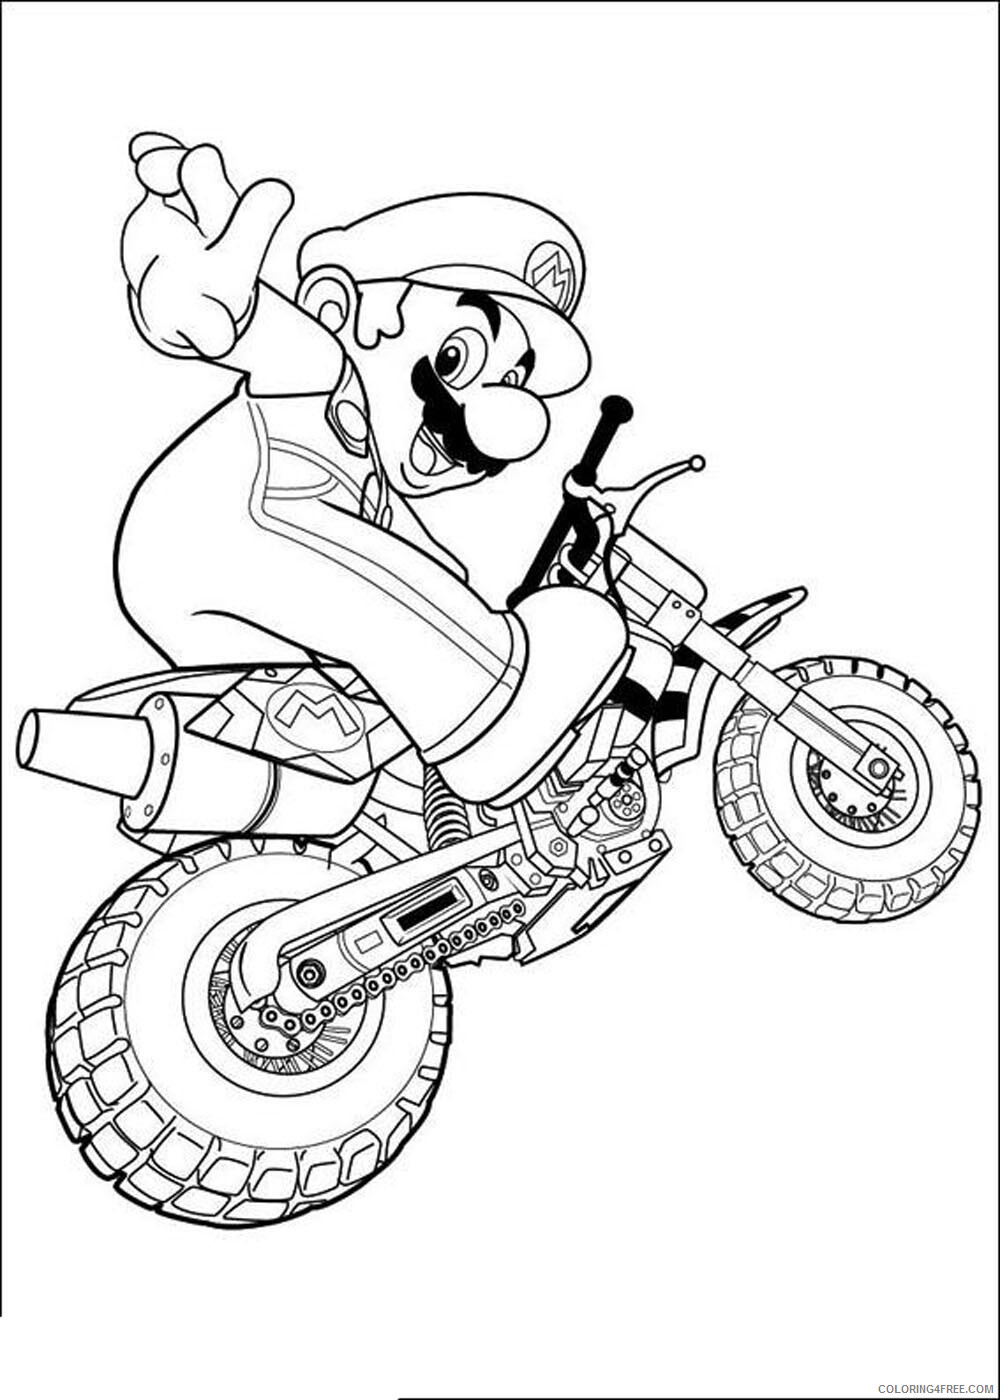 Super Mario Coloring Pages Games Mario Kart Pictures Printable 2021 1204 Coloring4free